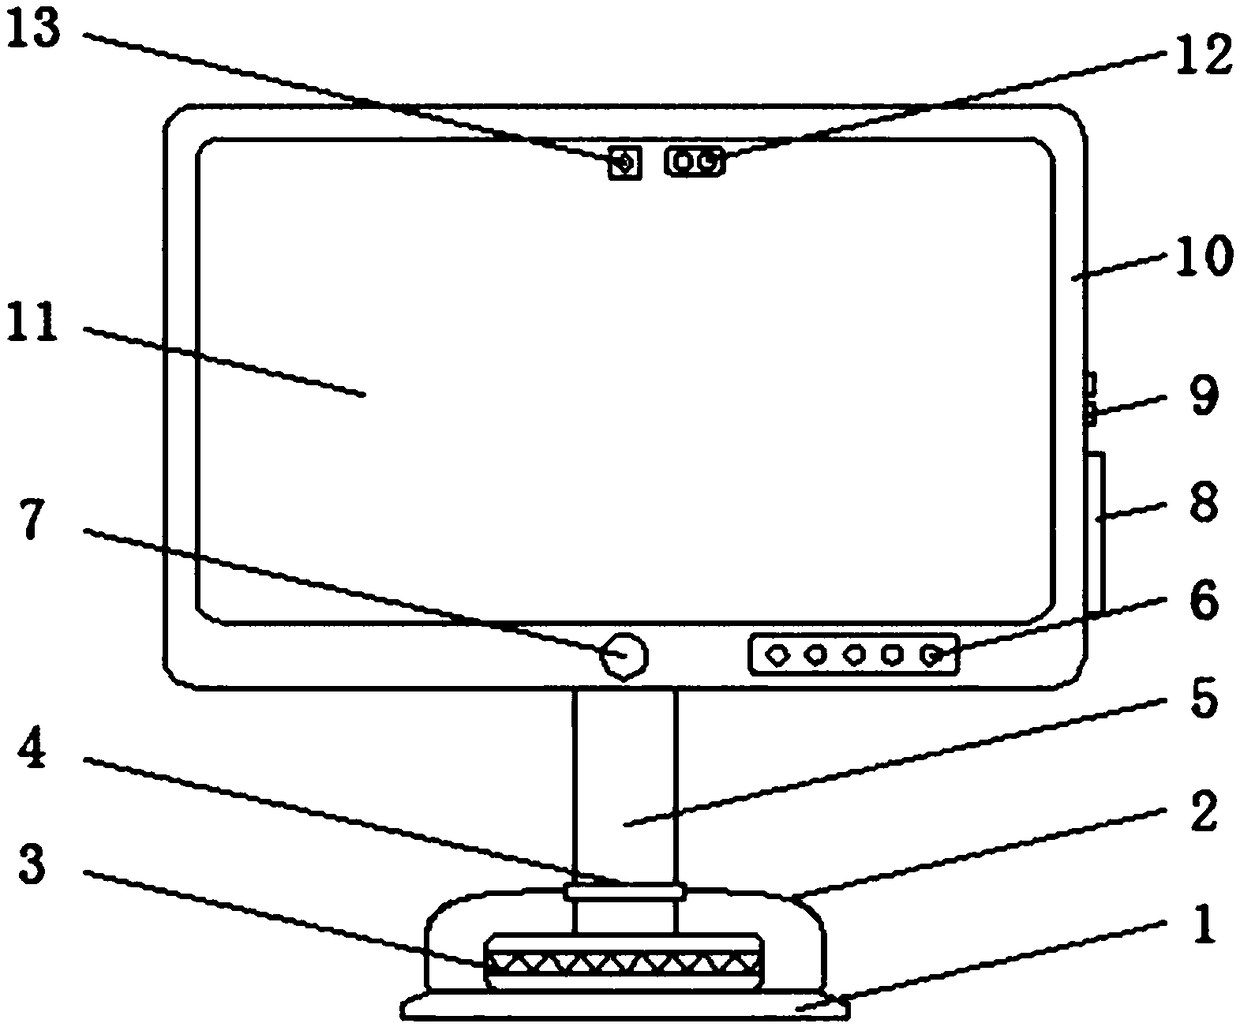 Integrated naked eye 3D computer